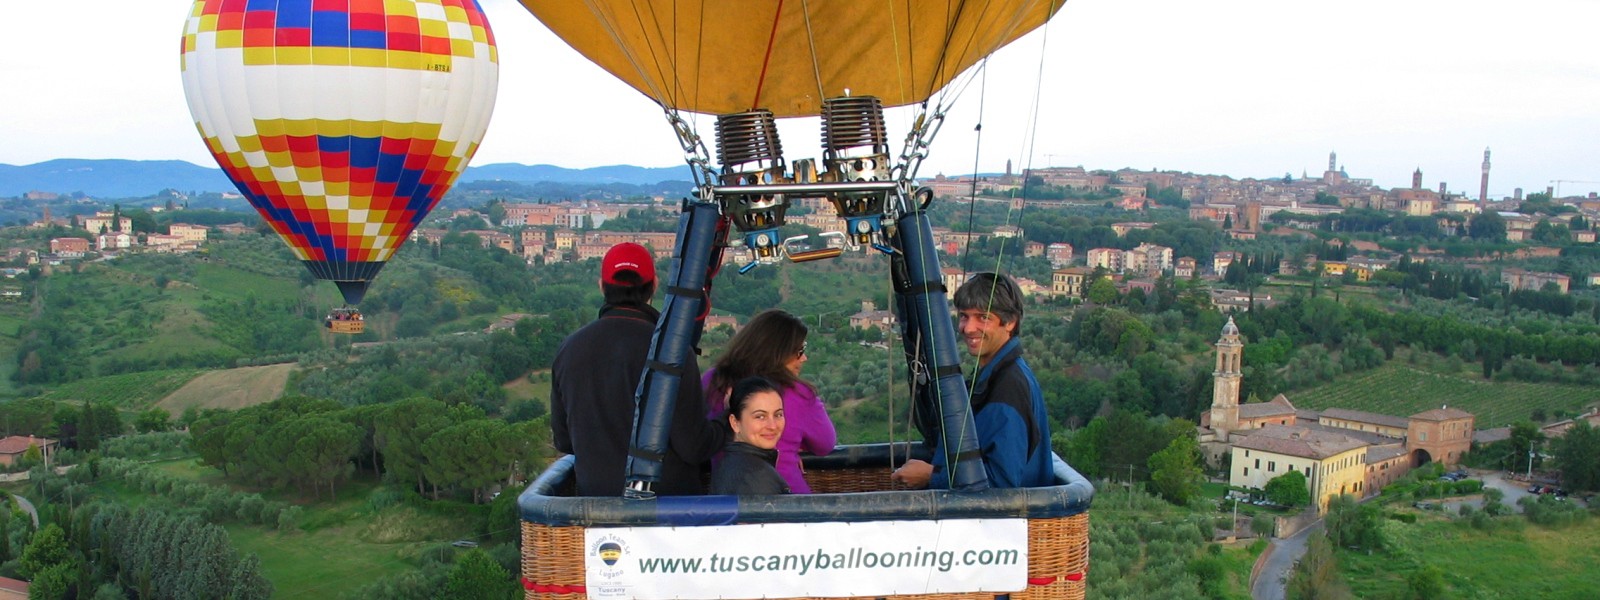 Discover Tuscany by Hot-air balloon